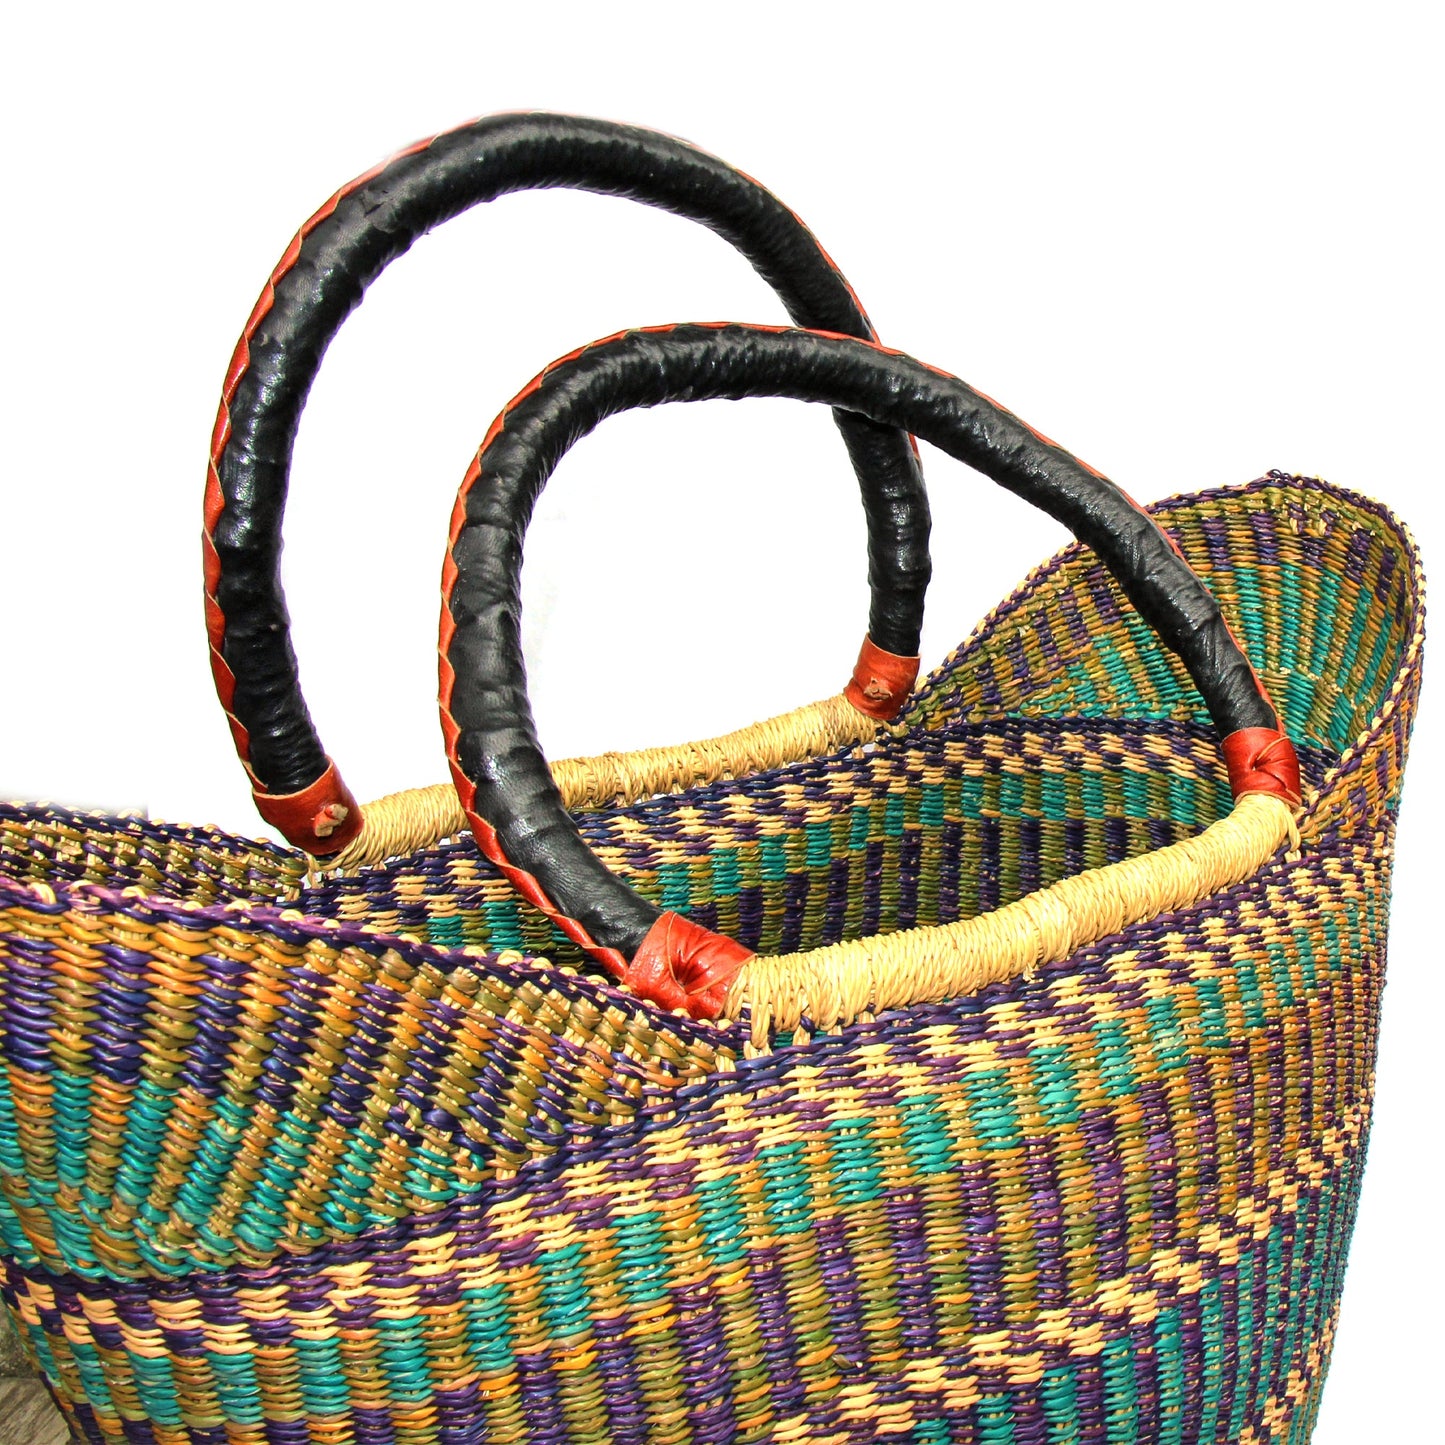 Bolga Tote, Mixed Colors with Leather Handle 16”to 18” by 11” to 13”